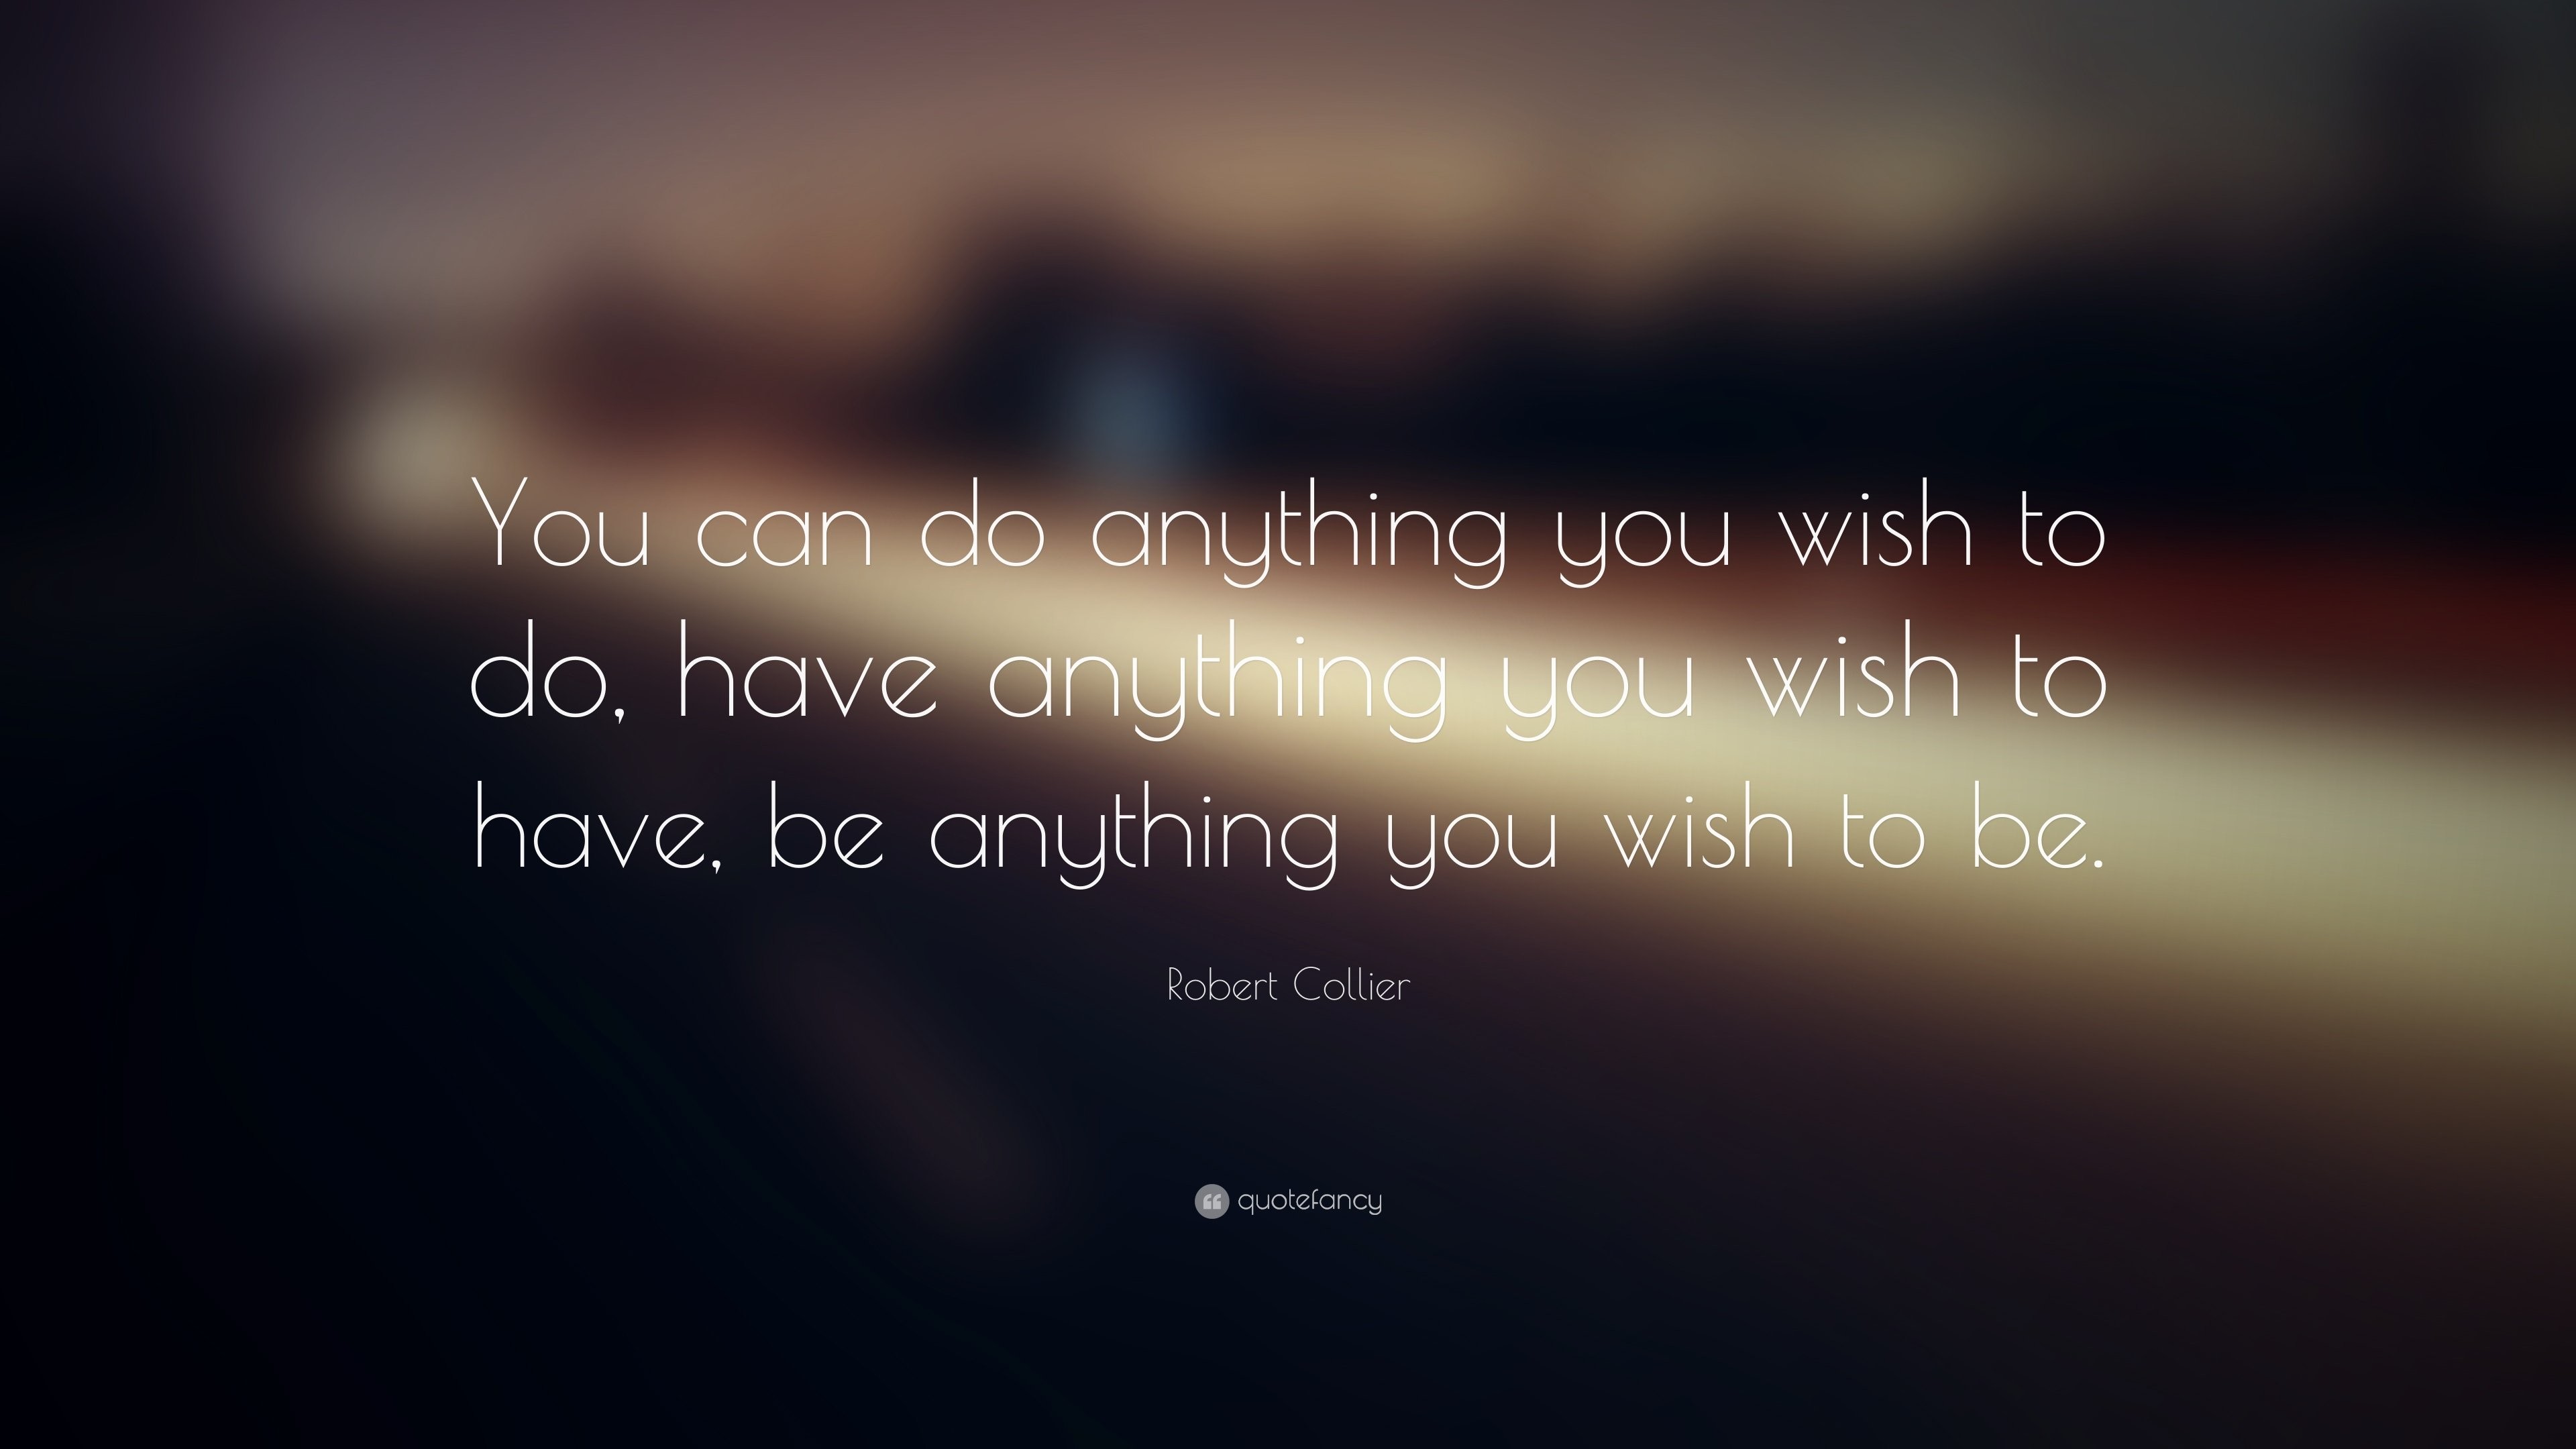 3840x2160 smart phone, inspirational, Motivational HD Wallpapers,quotes,typo, quote  think,